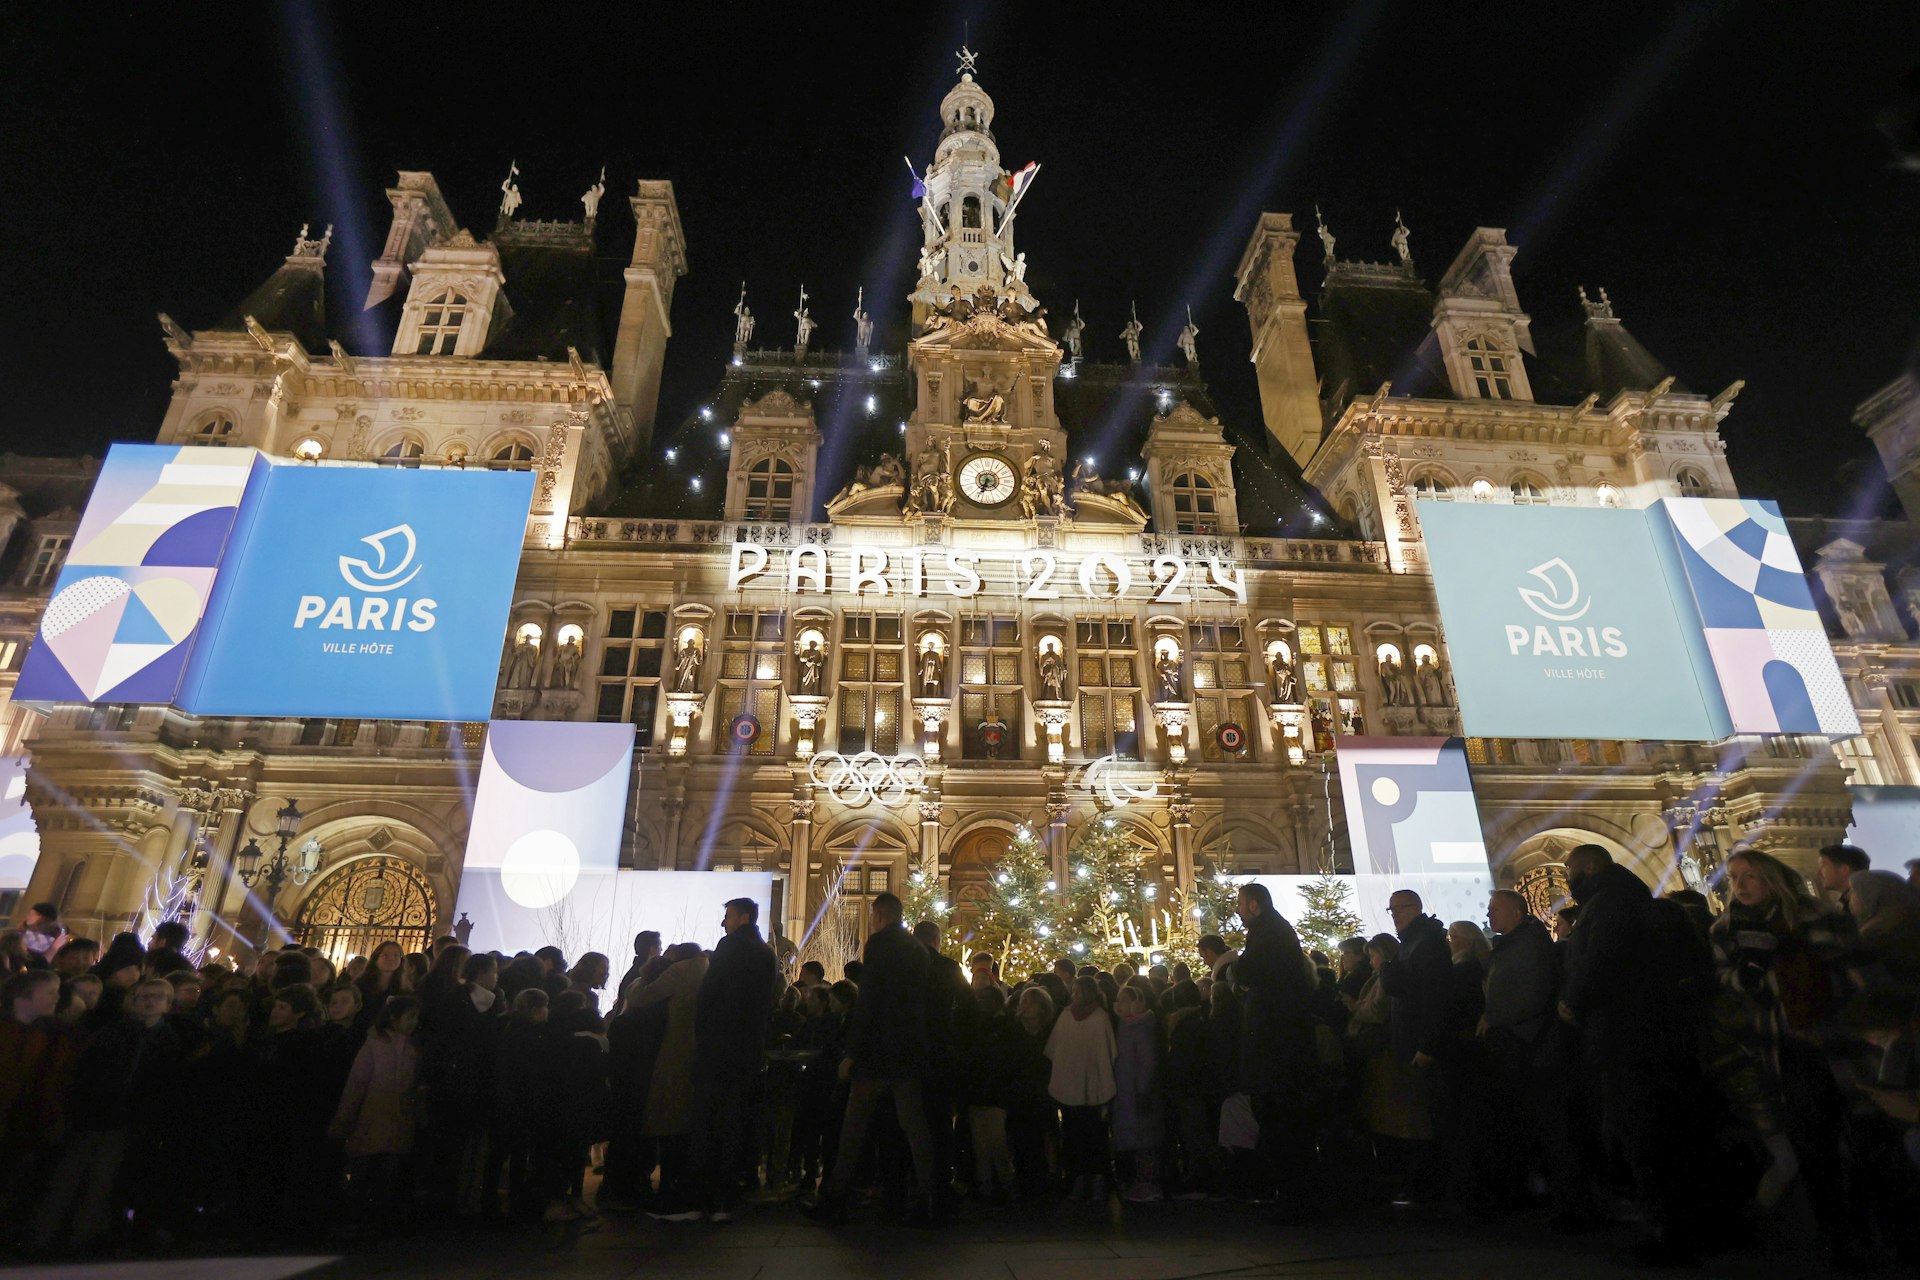 e logo, Paris 2024 representing the Olympic Games, several months prior to the start of the Paris 2024 Olympic and Paralympic Games is displayed on the illumined facade of Paris town hall. 